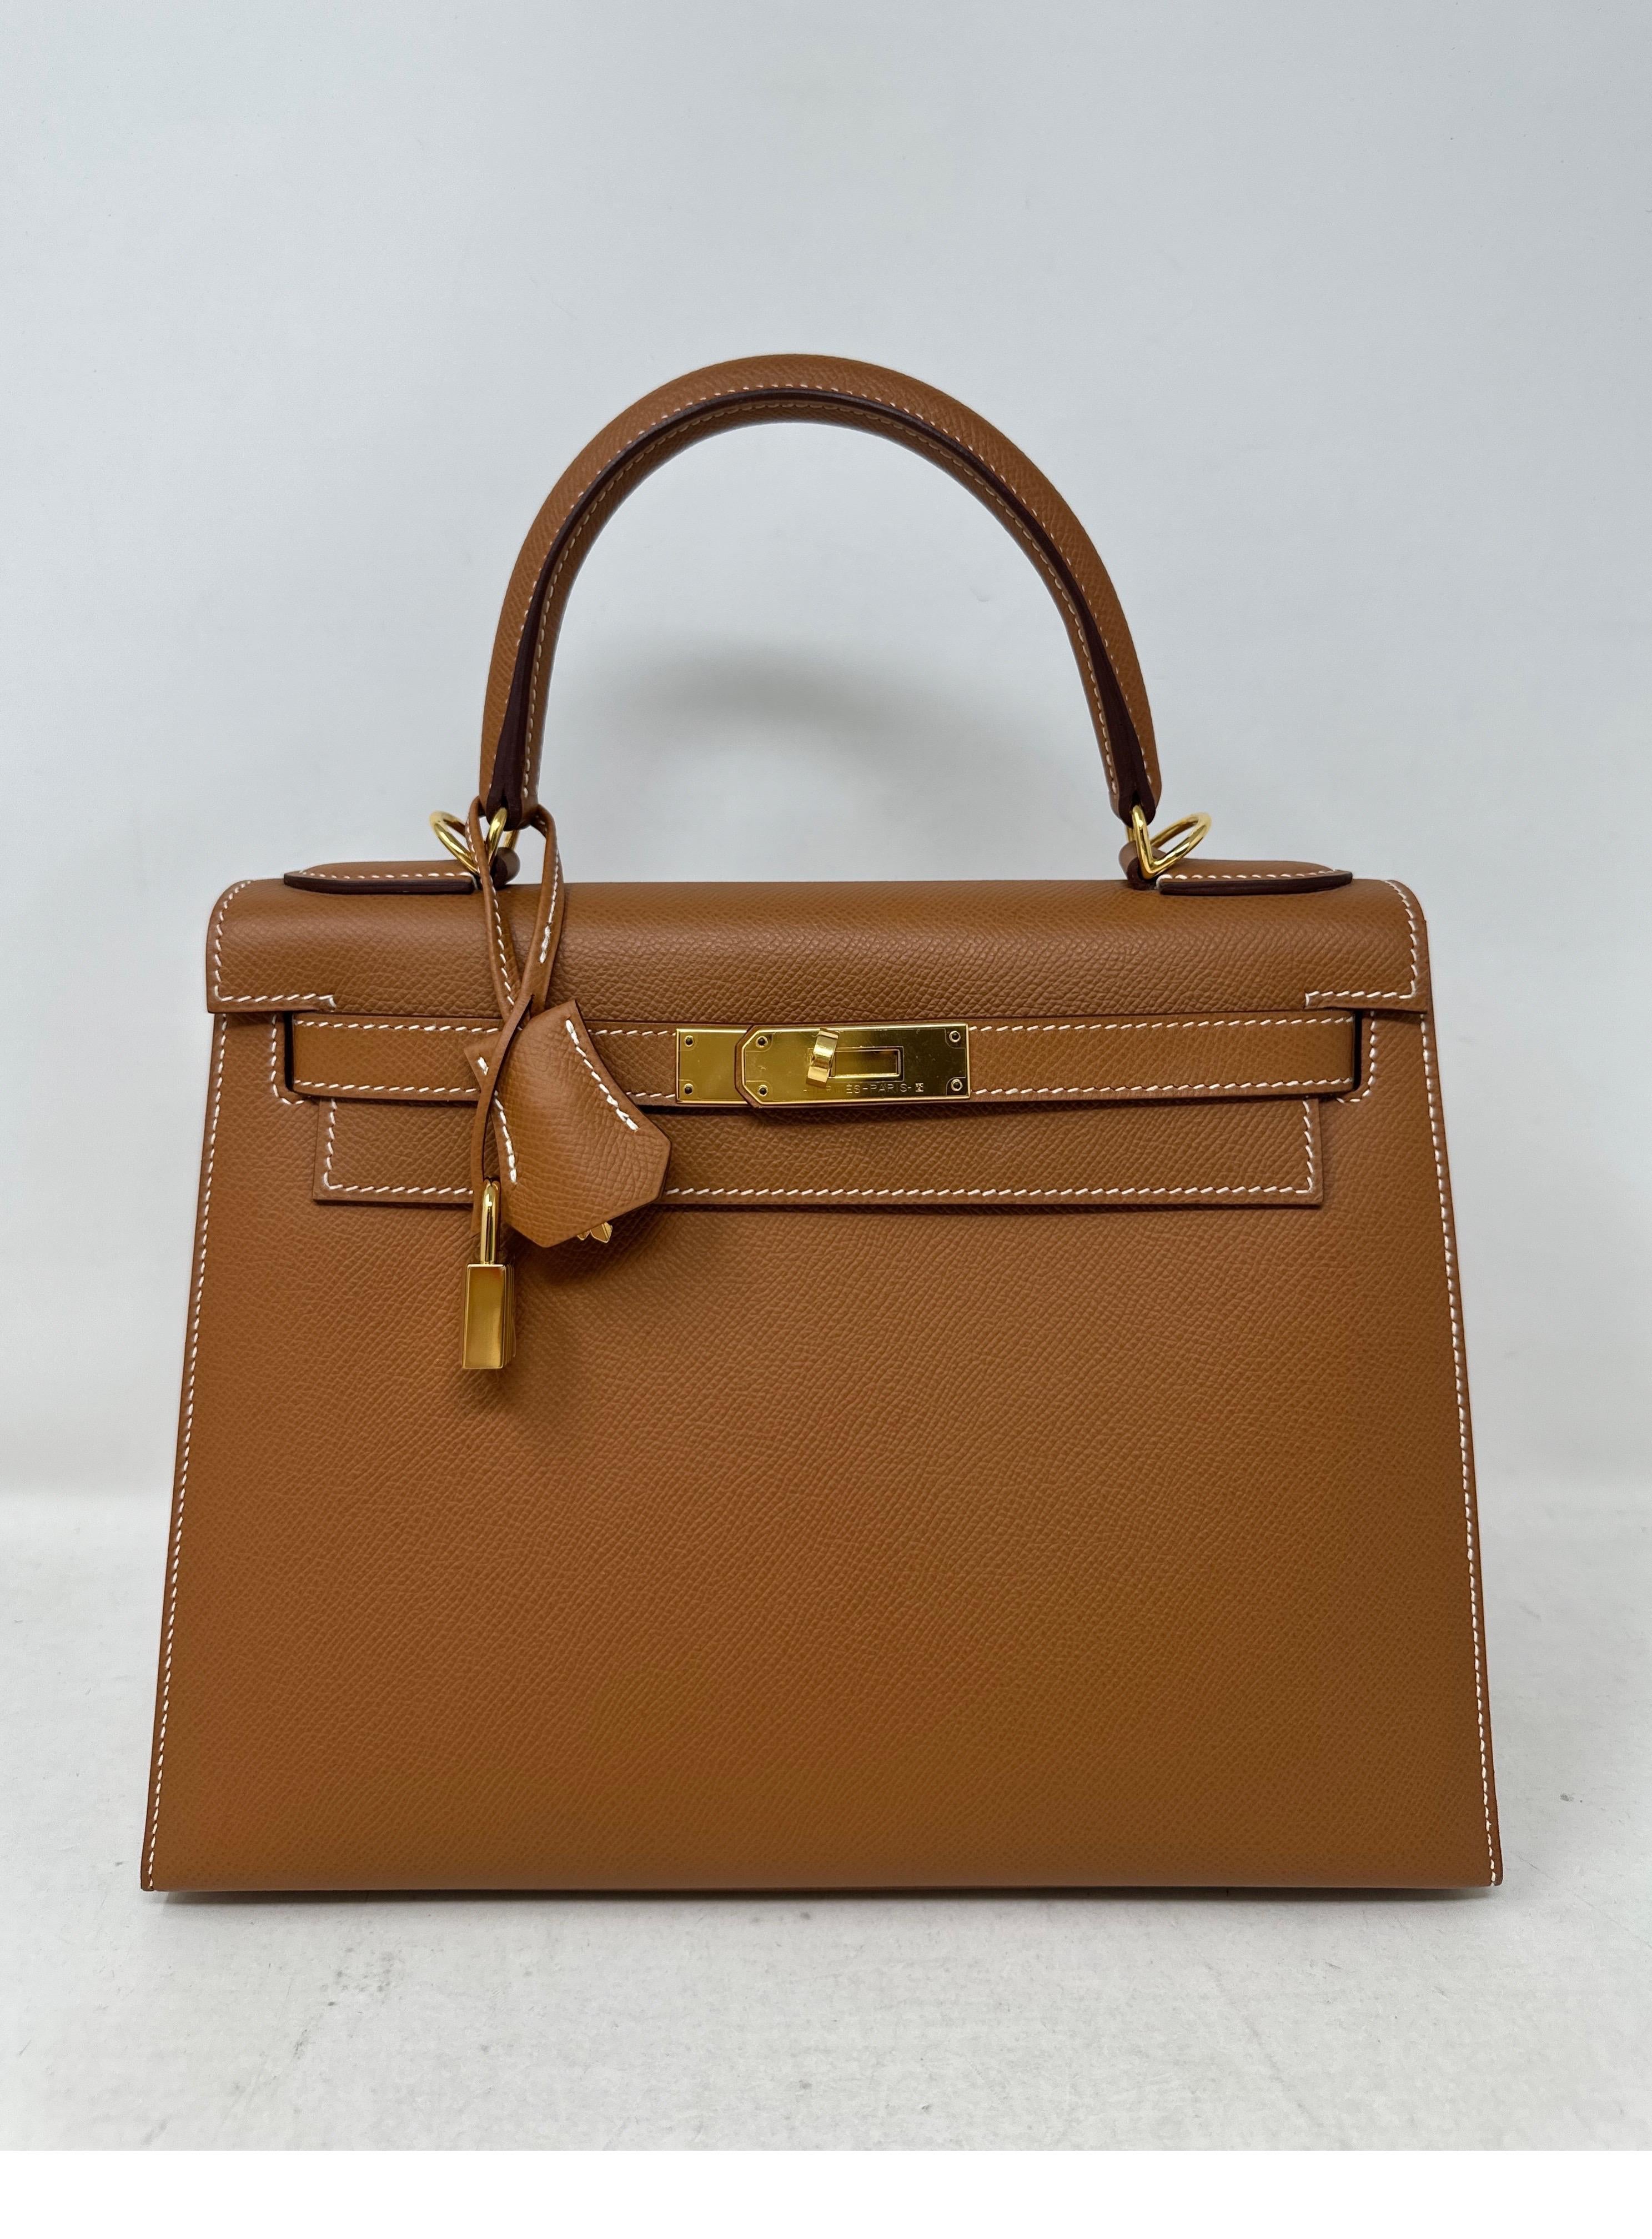 Hermes Gold Kelly 28 Bag. Beautiful epsom sellier Kelly bag. Most wanted combination gold tan color with gold hardware. Looks like new condition. Plastic is still on the hardware. Strap was never used. Structure in very nice and interior clean.